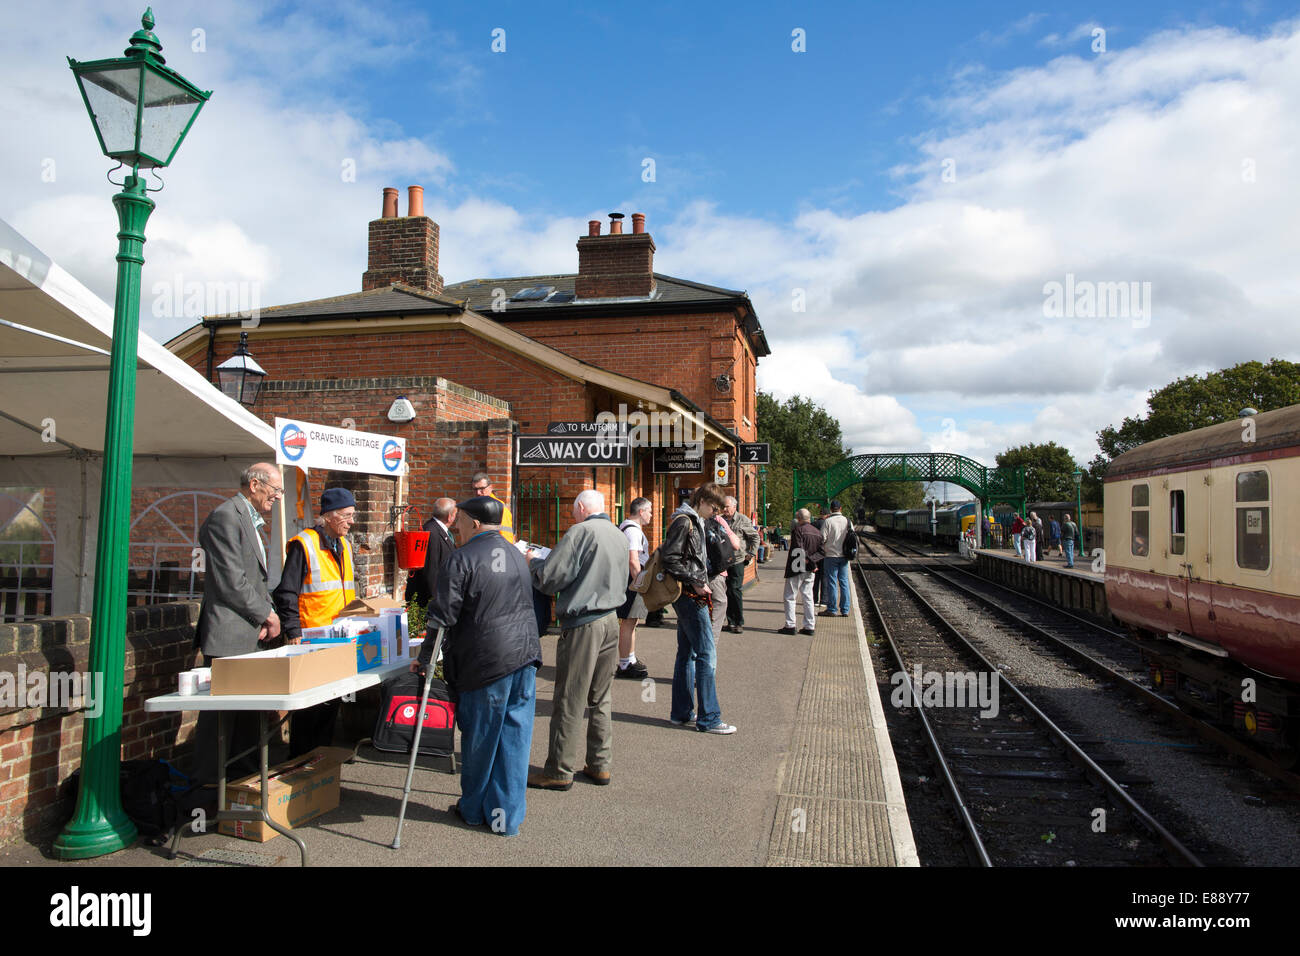 Cravens Heritage Tube train enthusiasts on the platform at North Weald Station, Epping Ongar Railway, Essex, England, UK Stock Photo